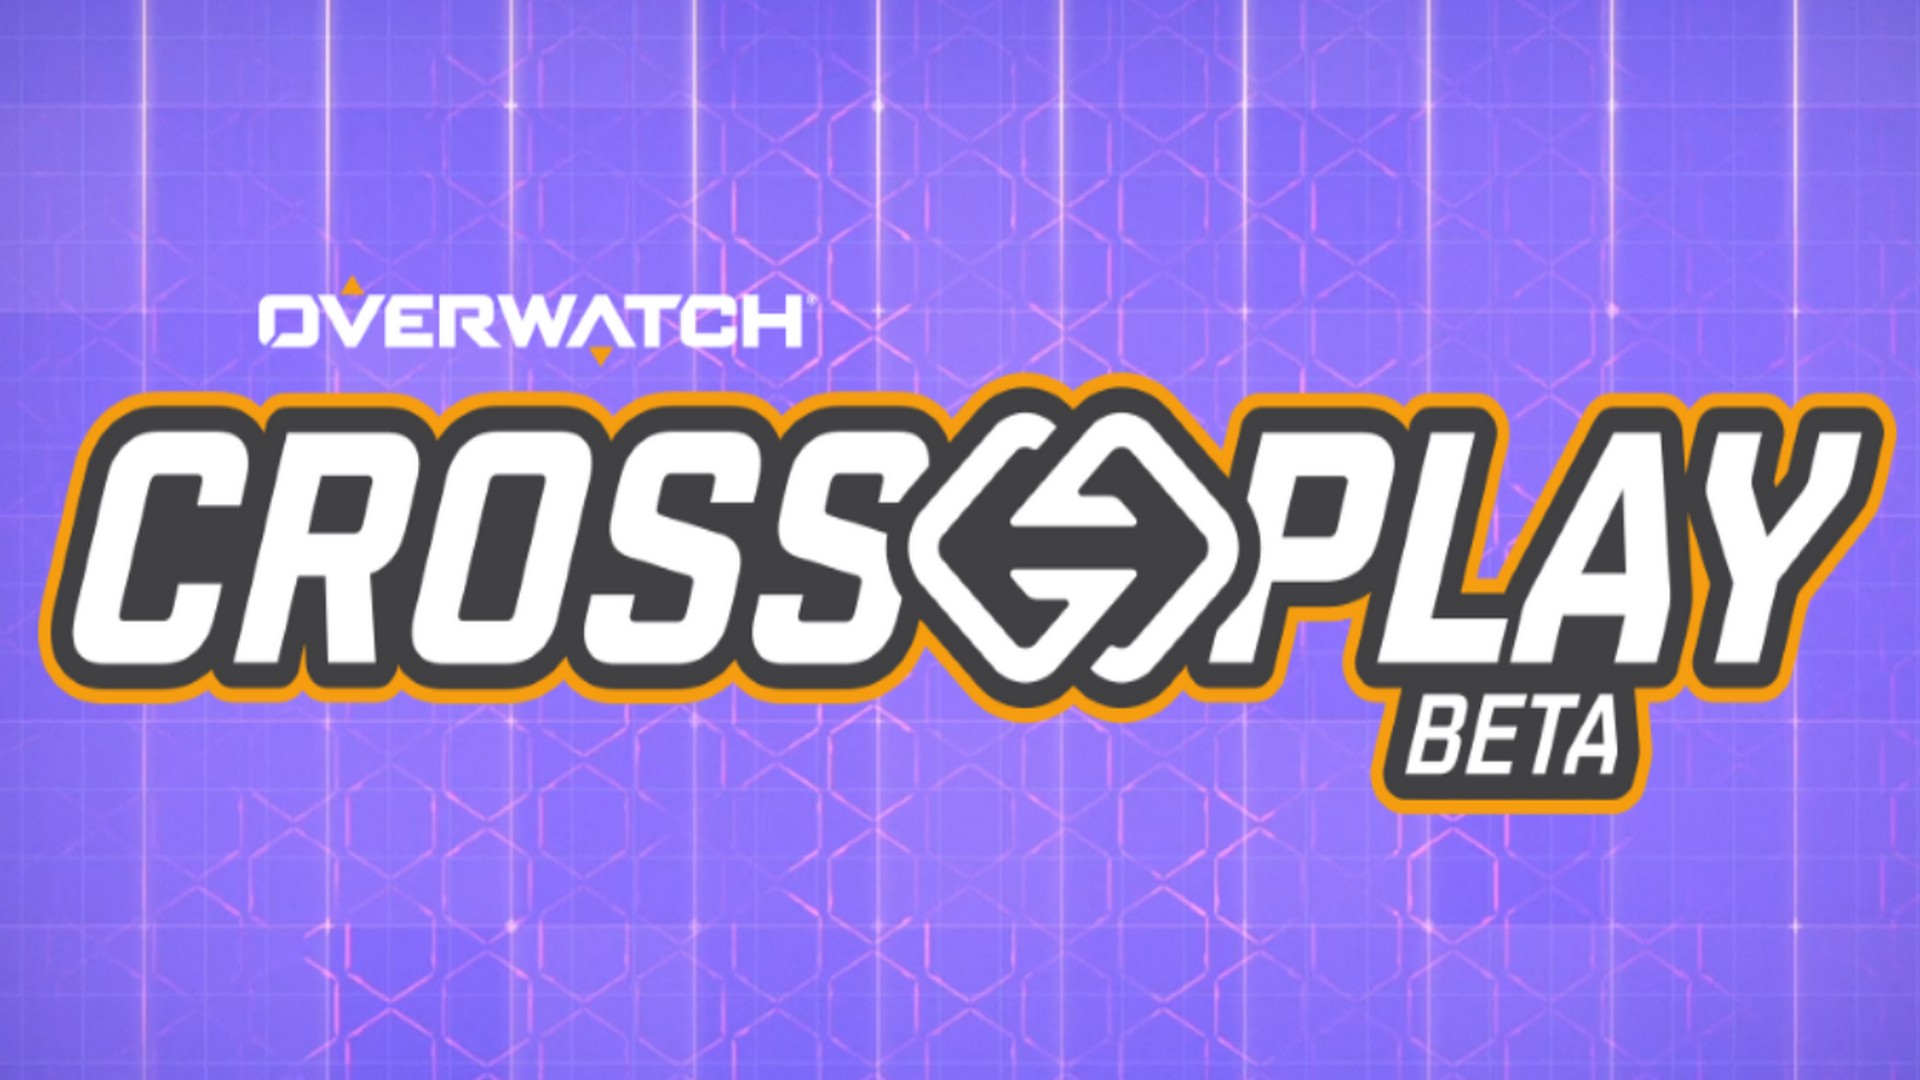 Cross-Play Is Coming To Overwatch